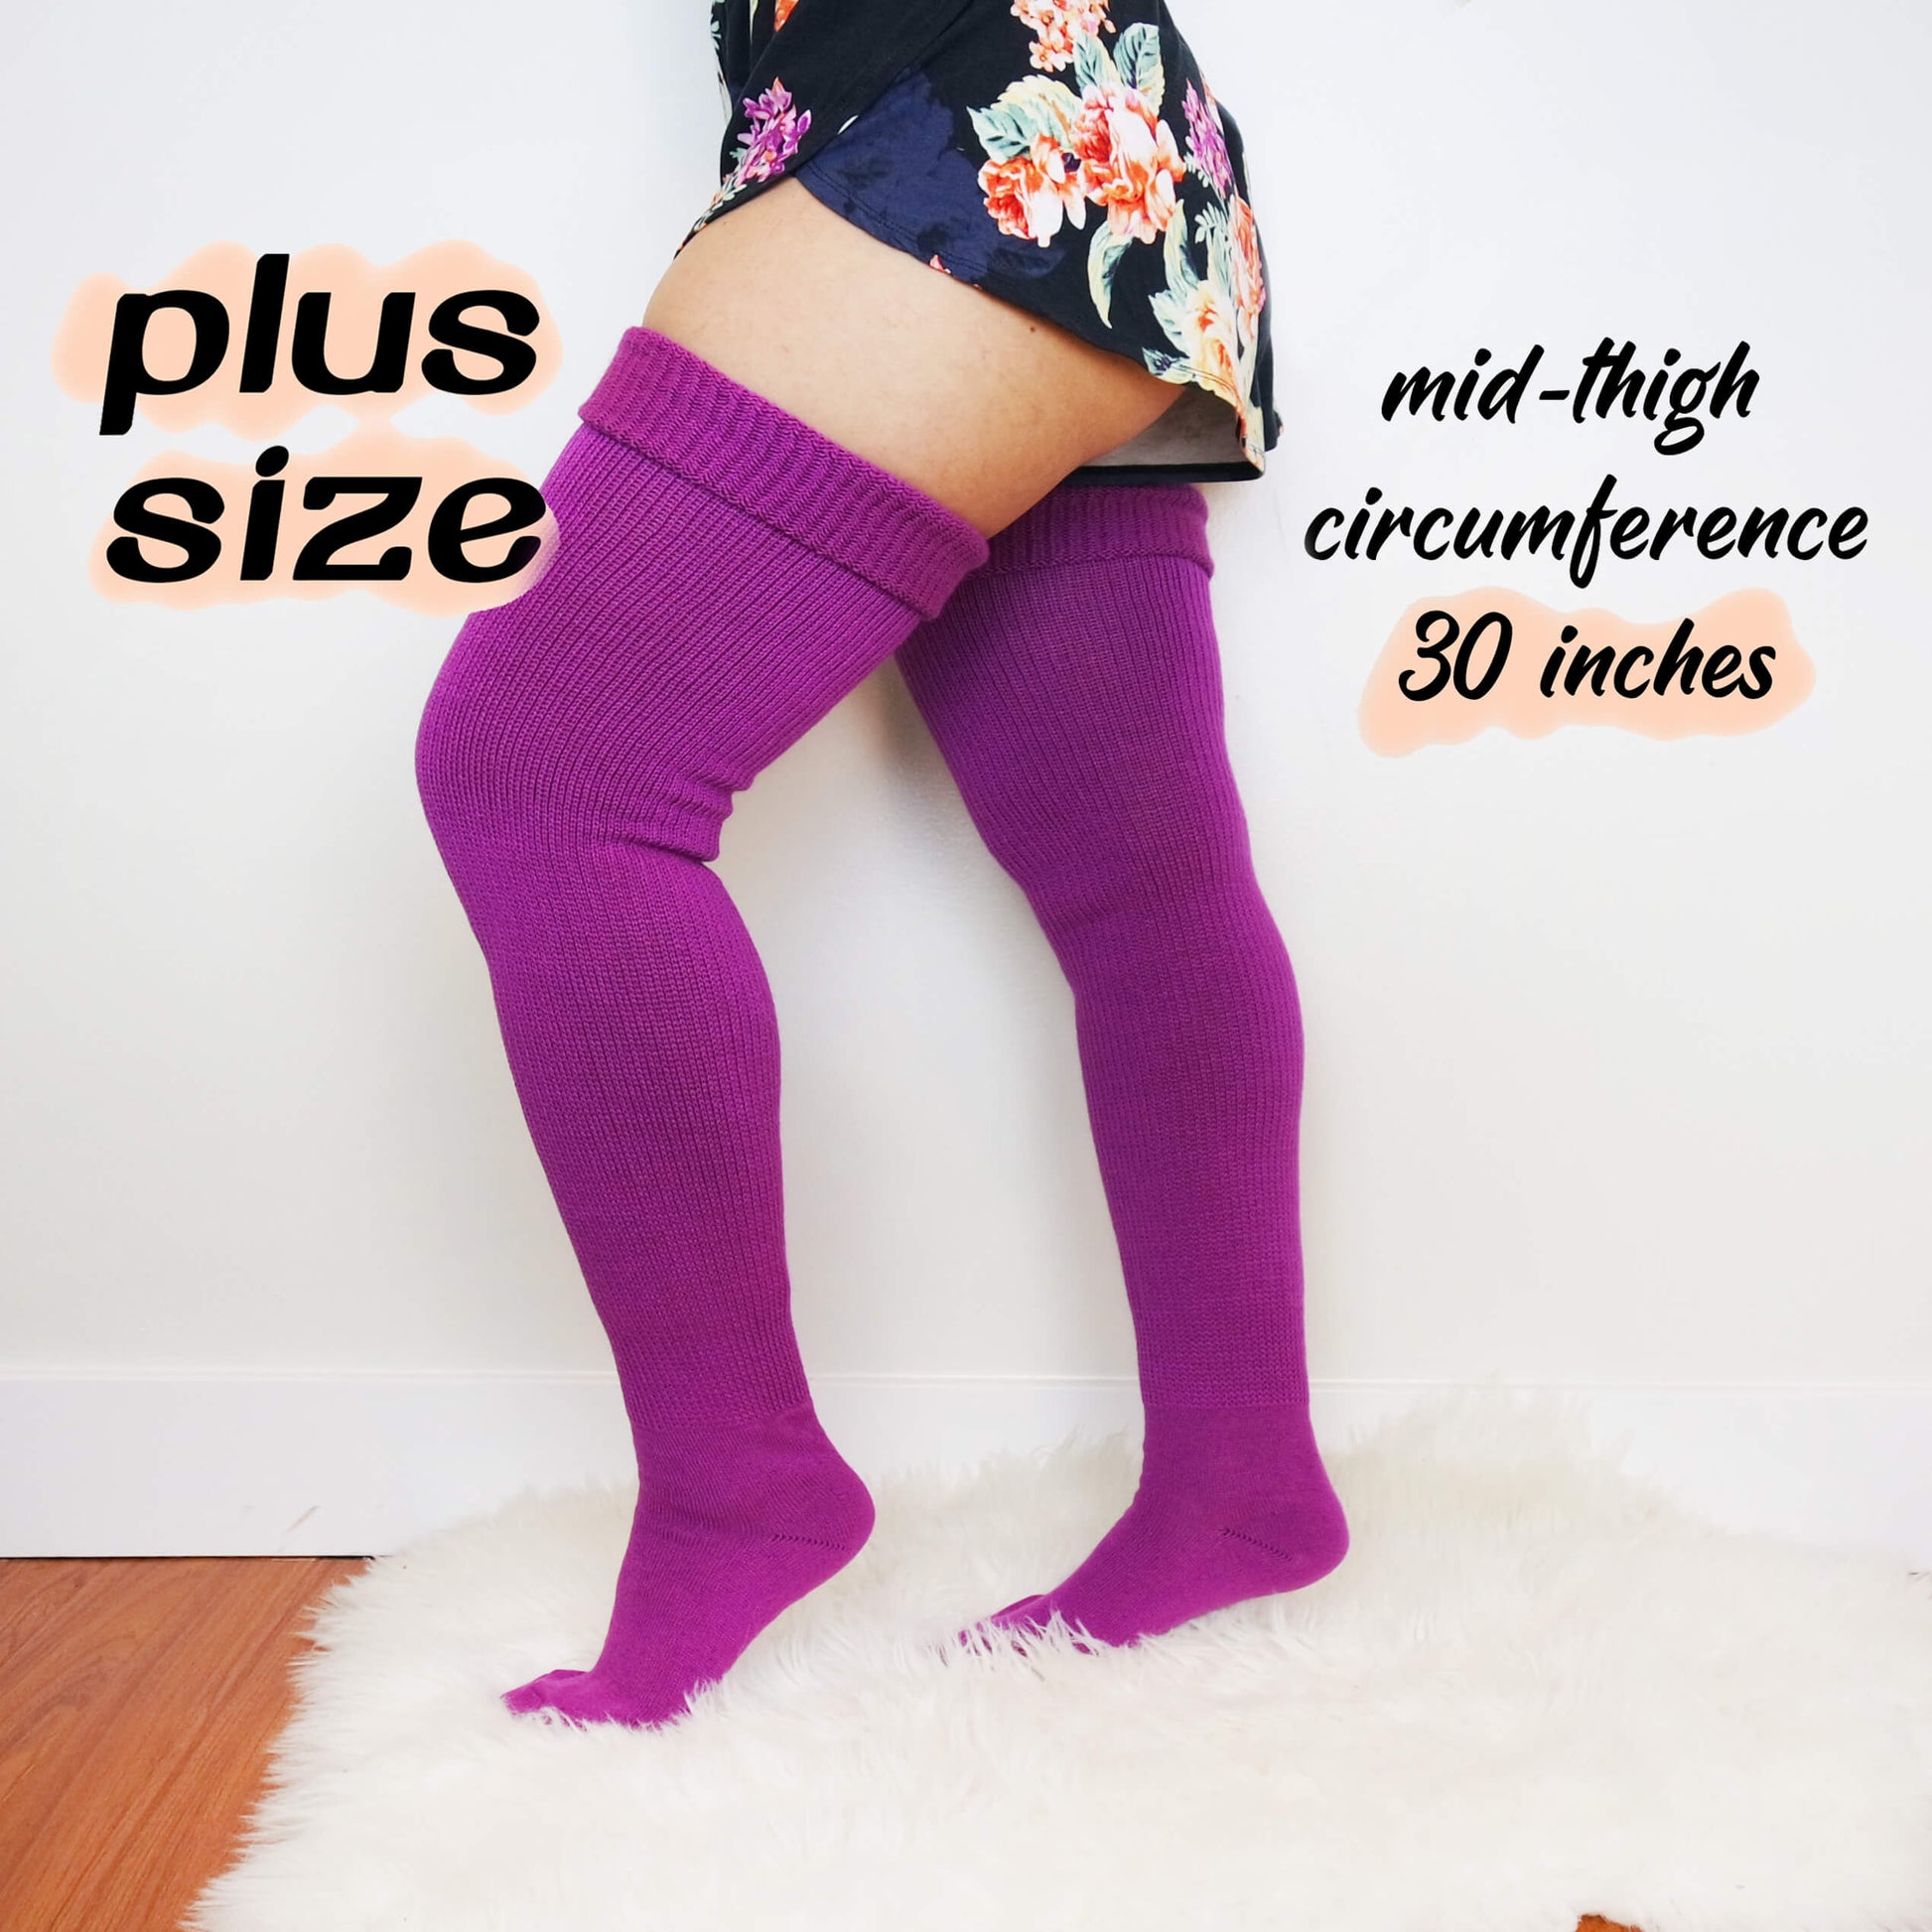 "Purple plus size thigh high socks, a versatile and chic choice for adding a pop of color to any outfit."